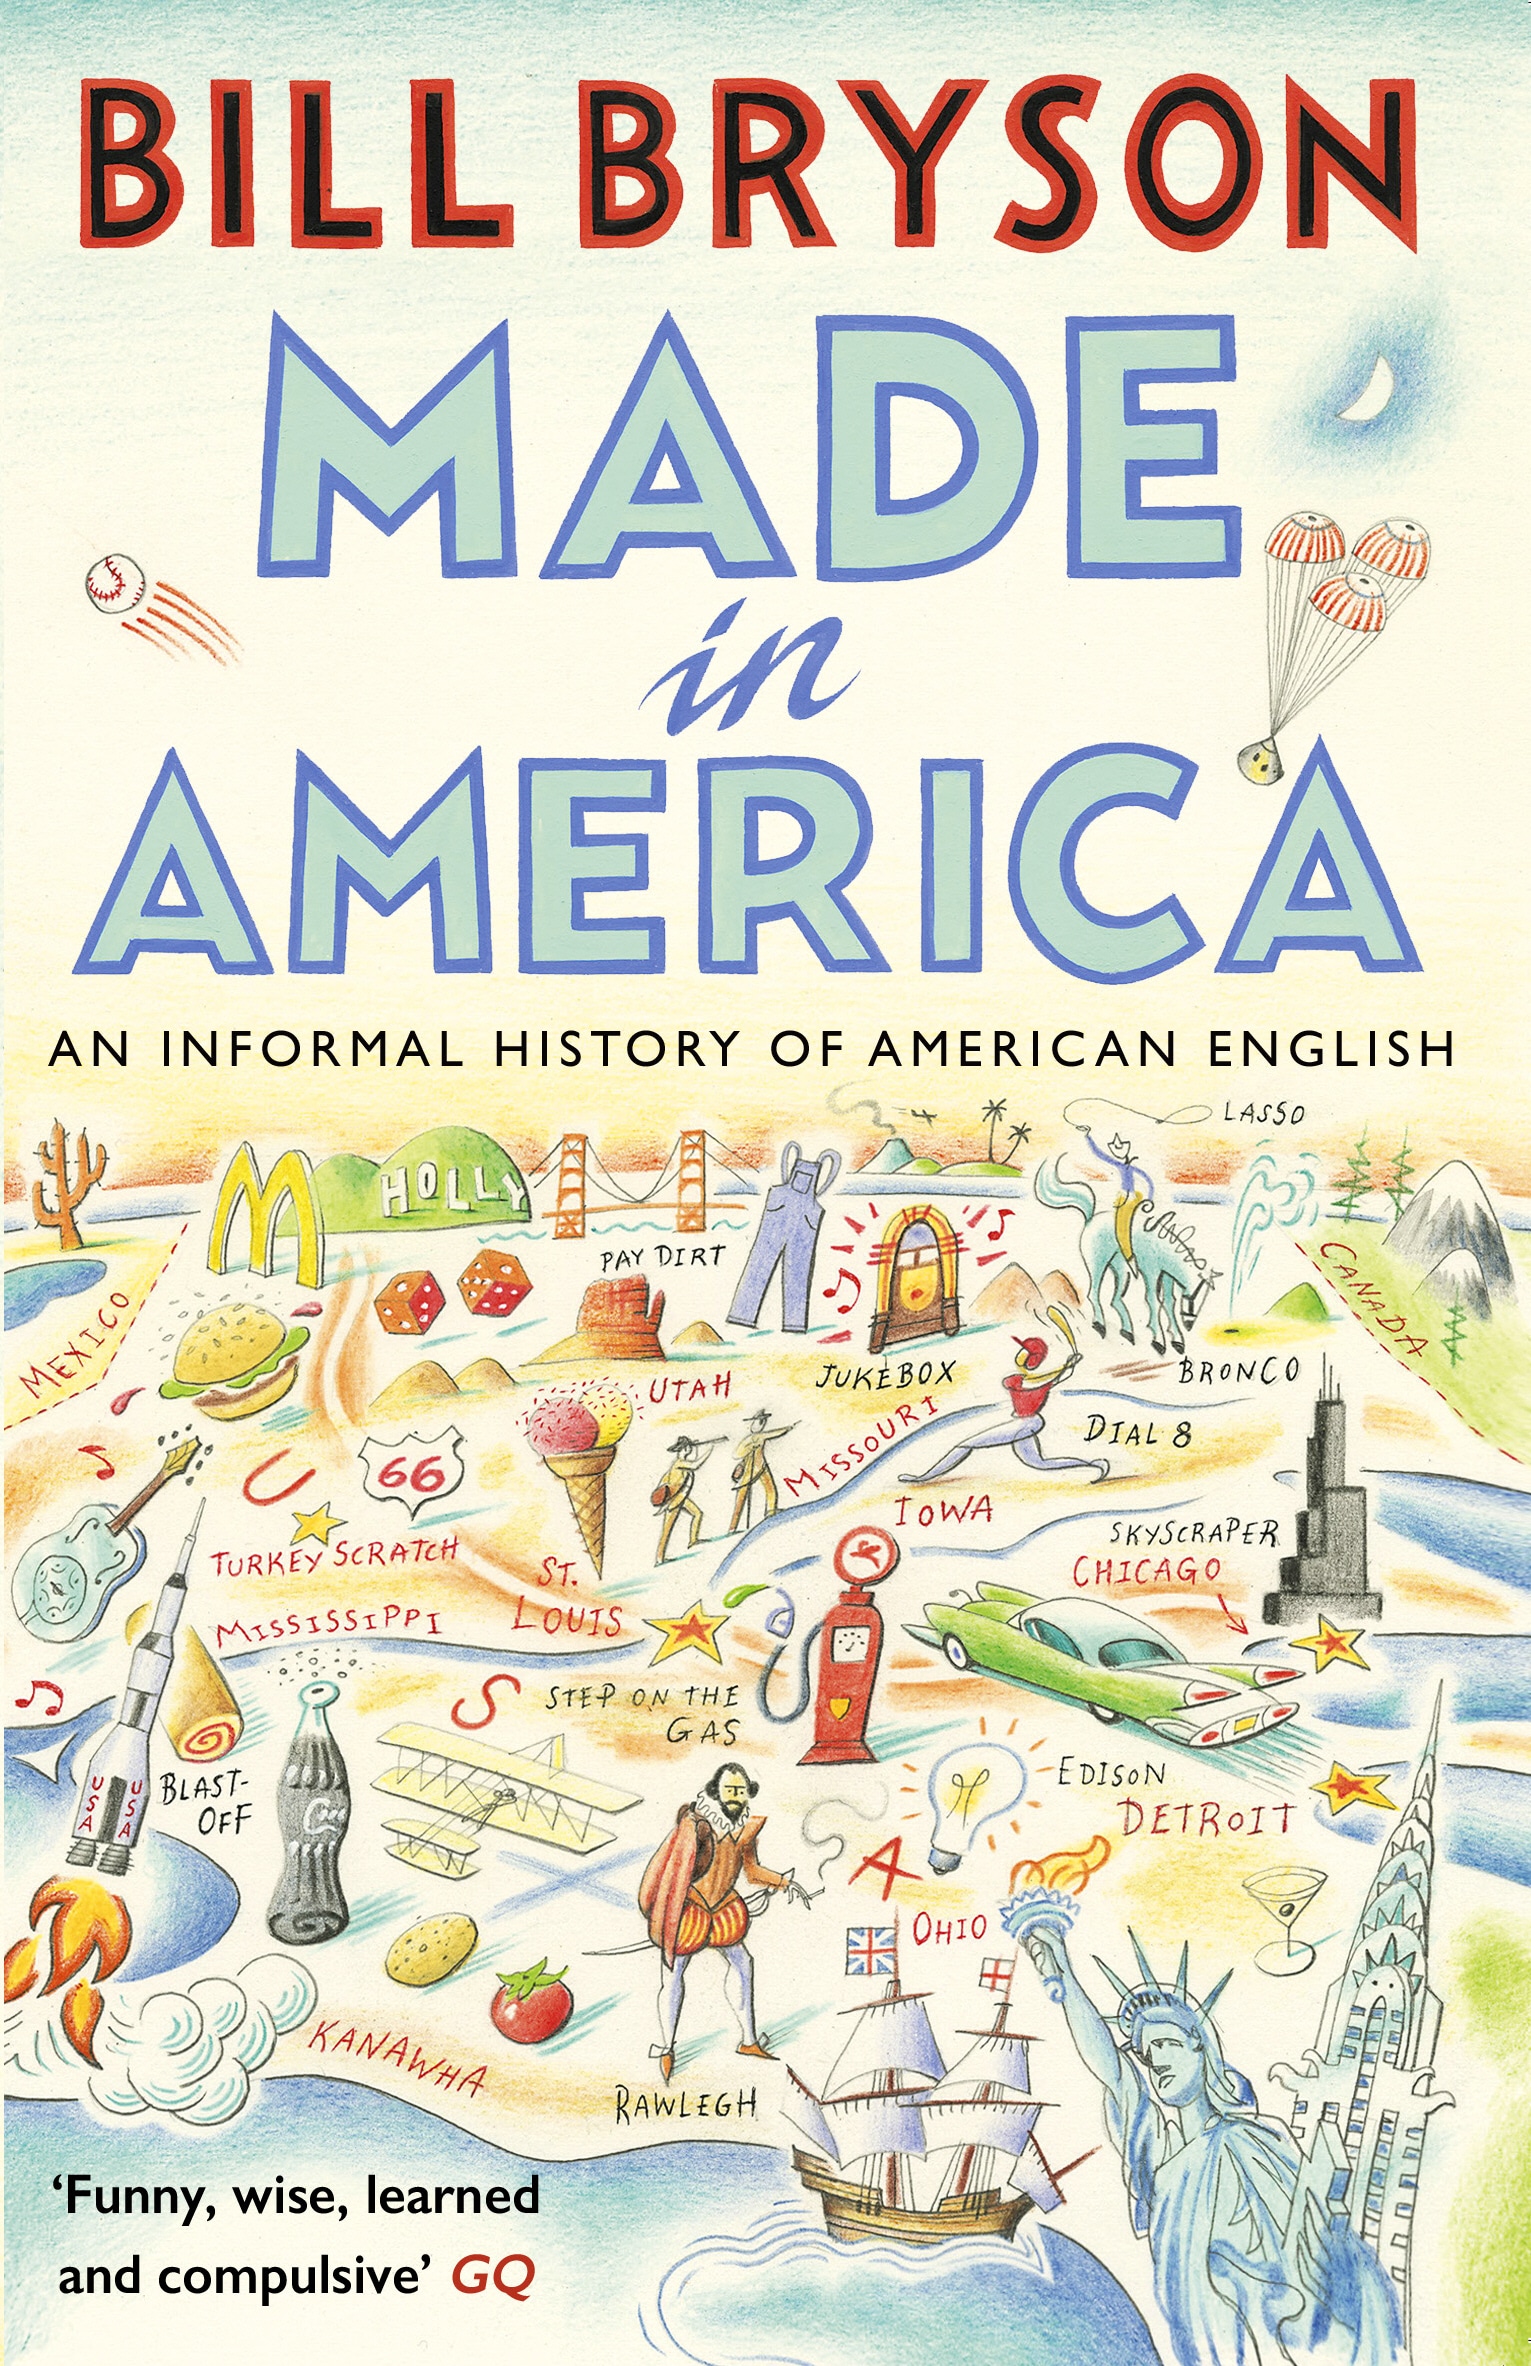 Book “Made In America” by Bill Bryson — September 8, 2016